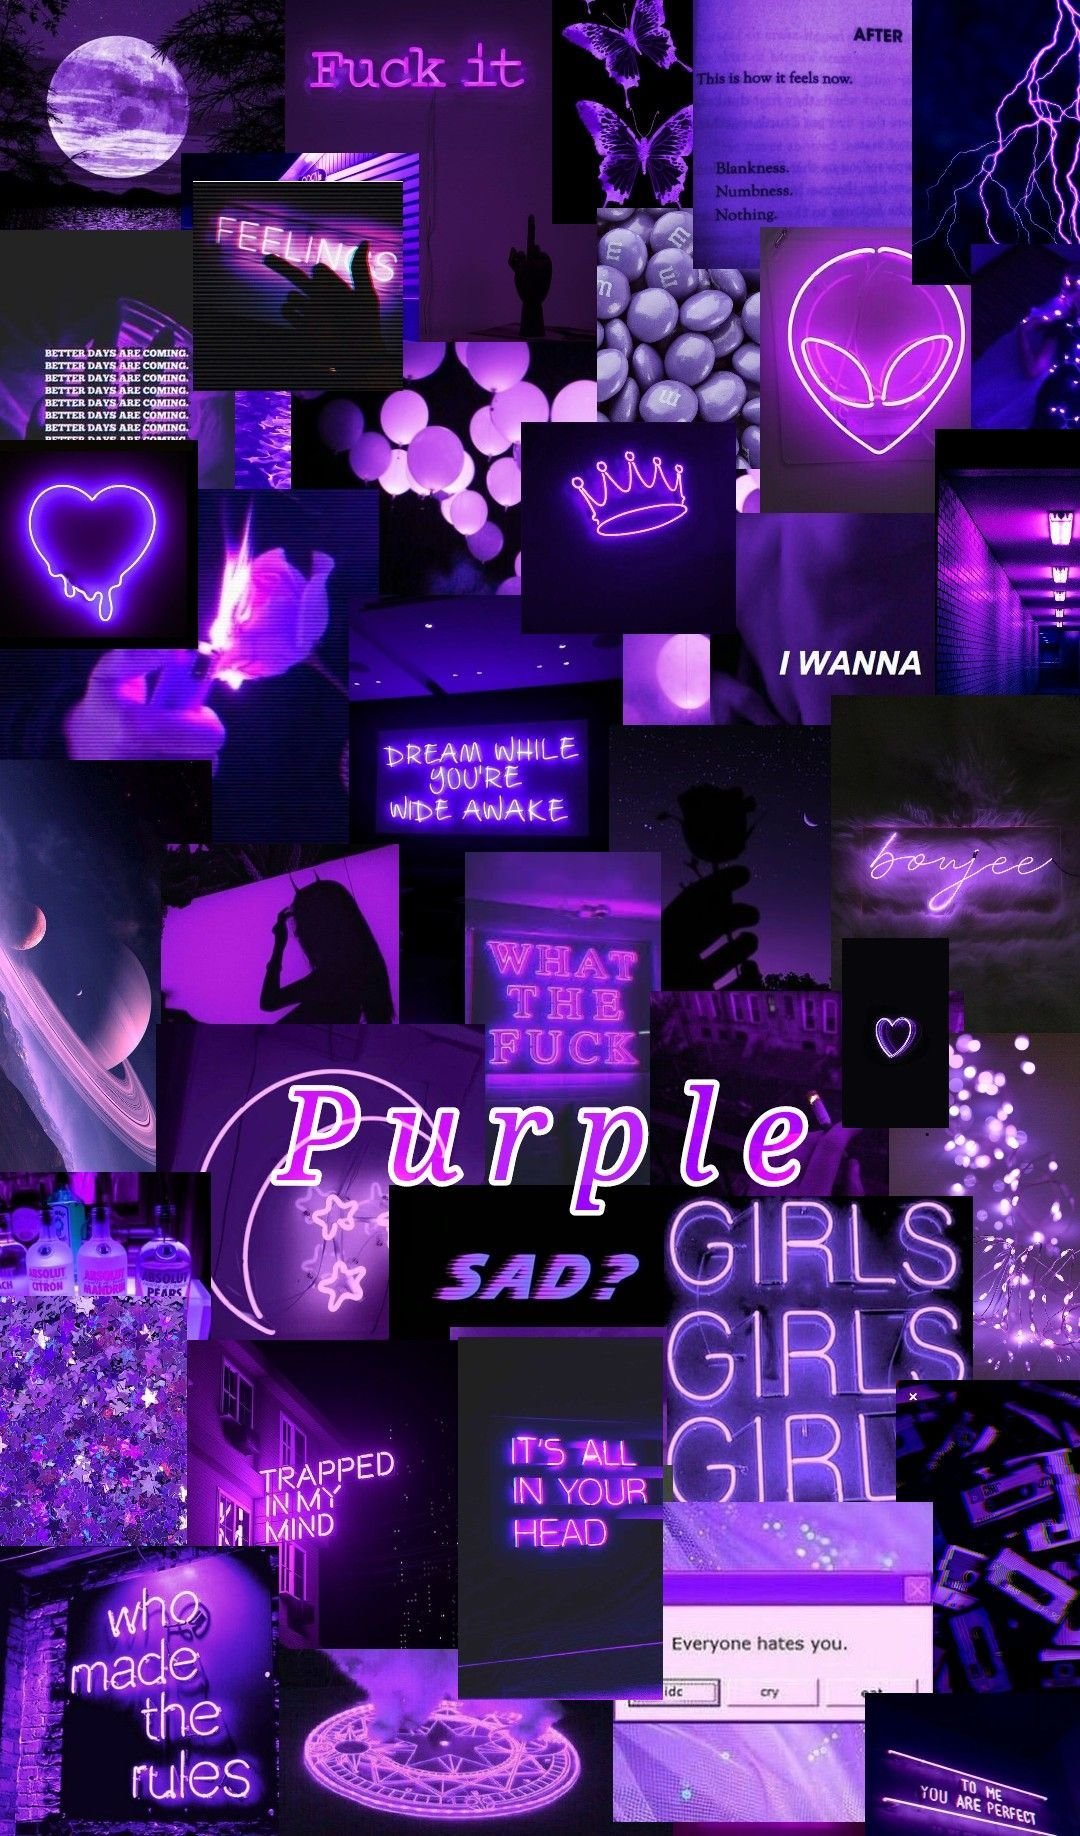 Purple Wallpapers - Top Free Purple Backgrounds - WallpaperAccess